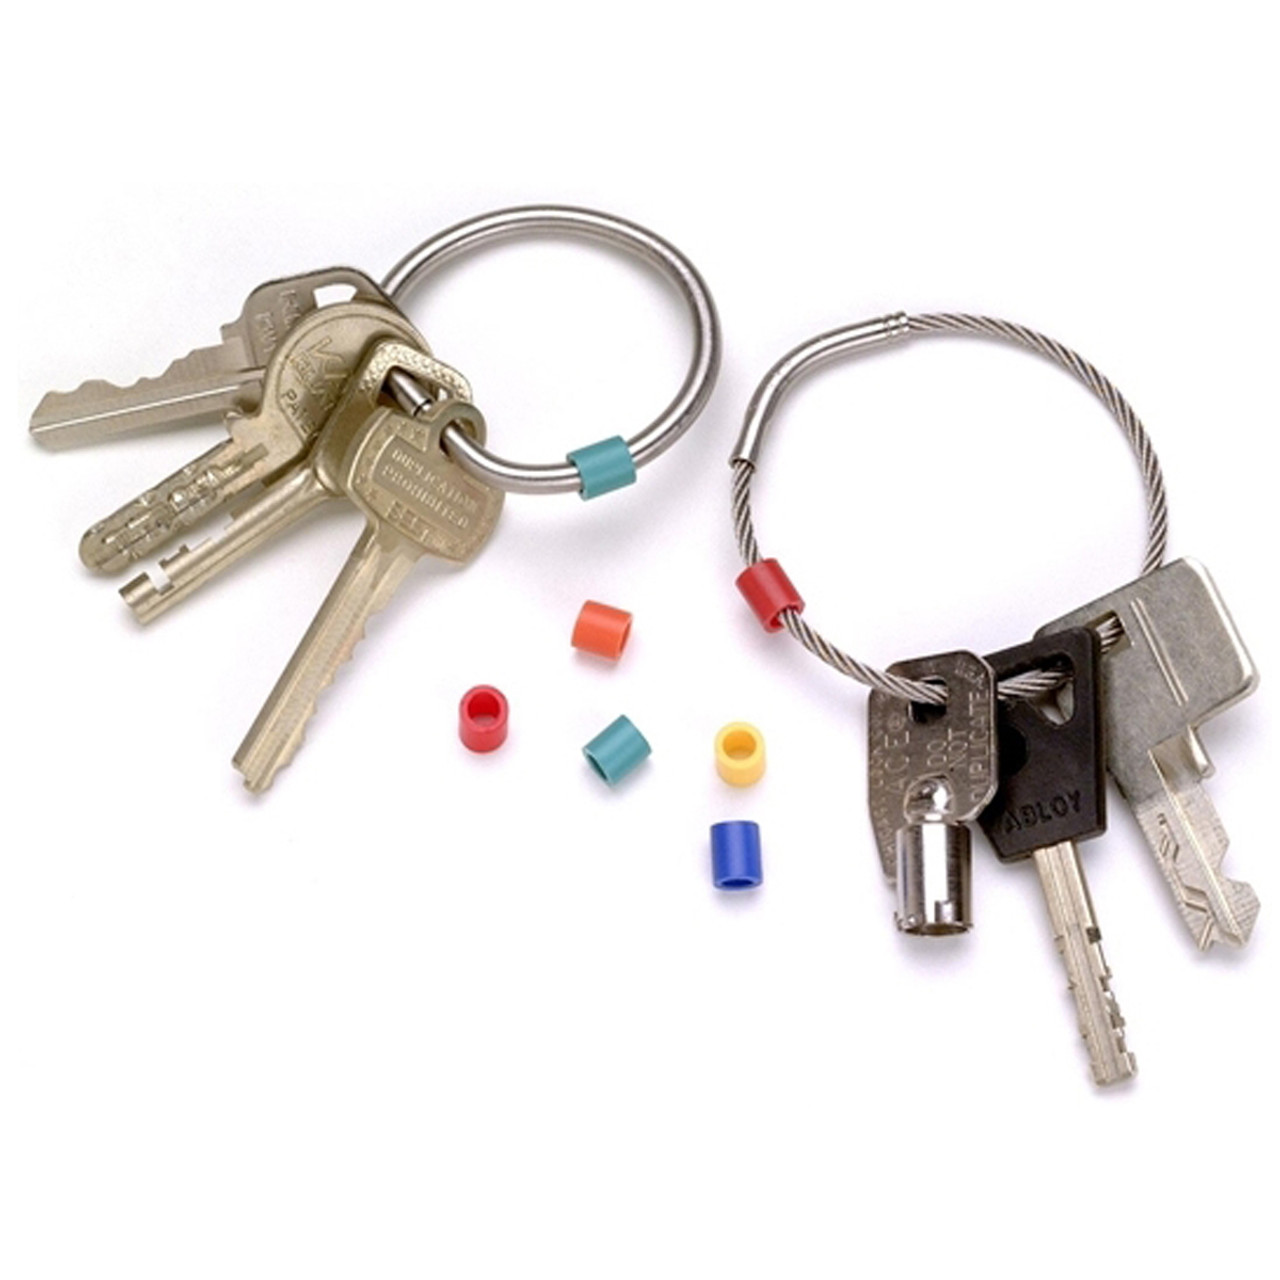 Shop for and Buy Color Coding Rings for Tamper Proof Keyrings at